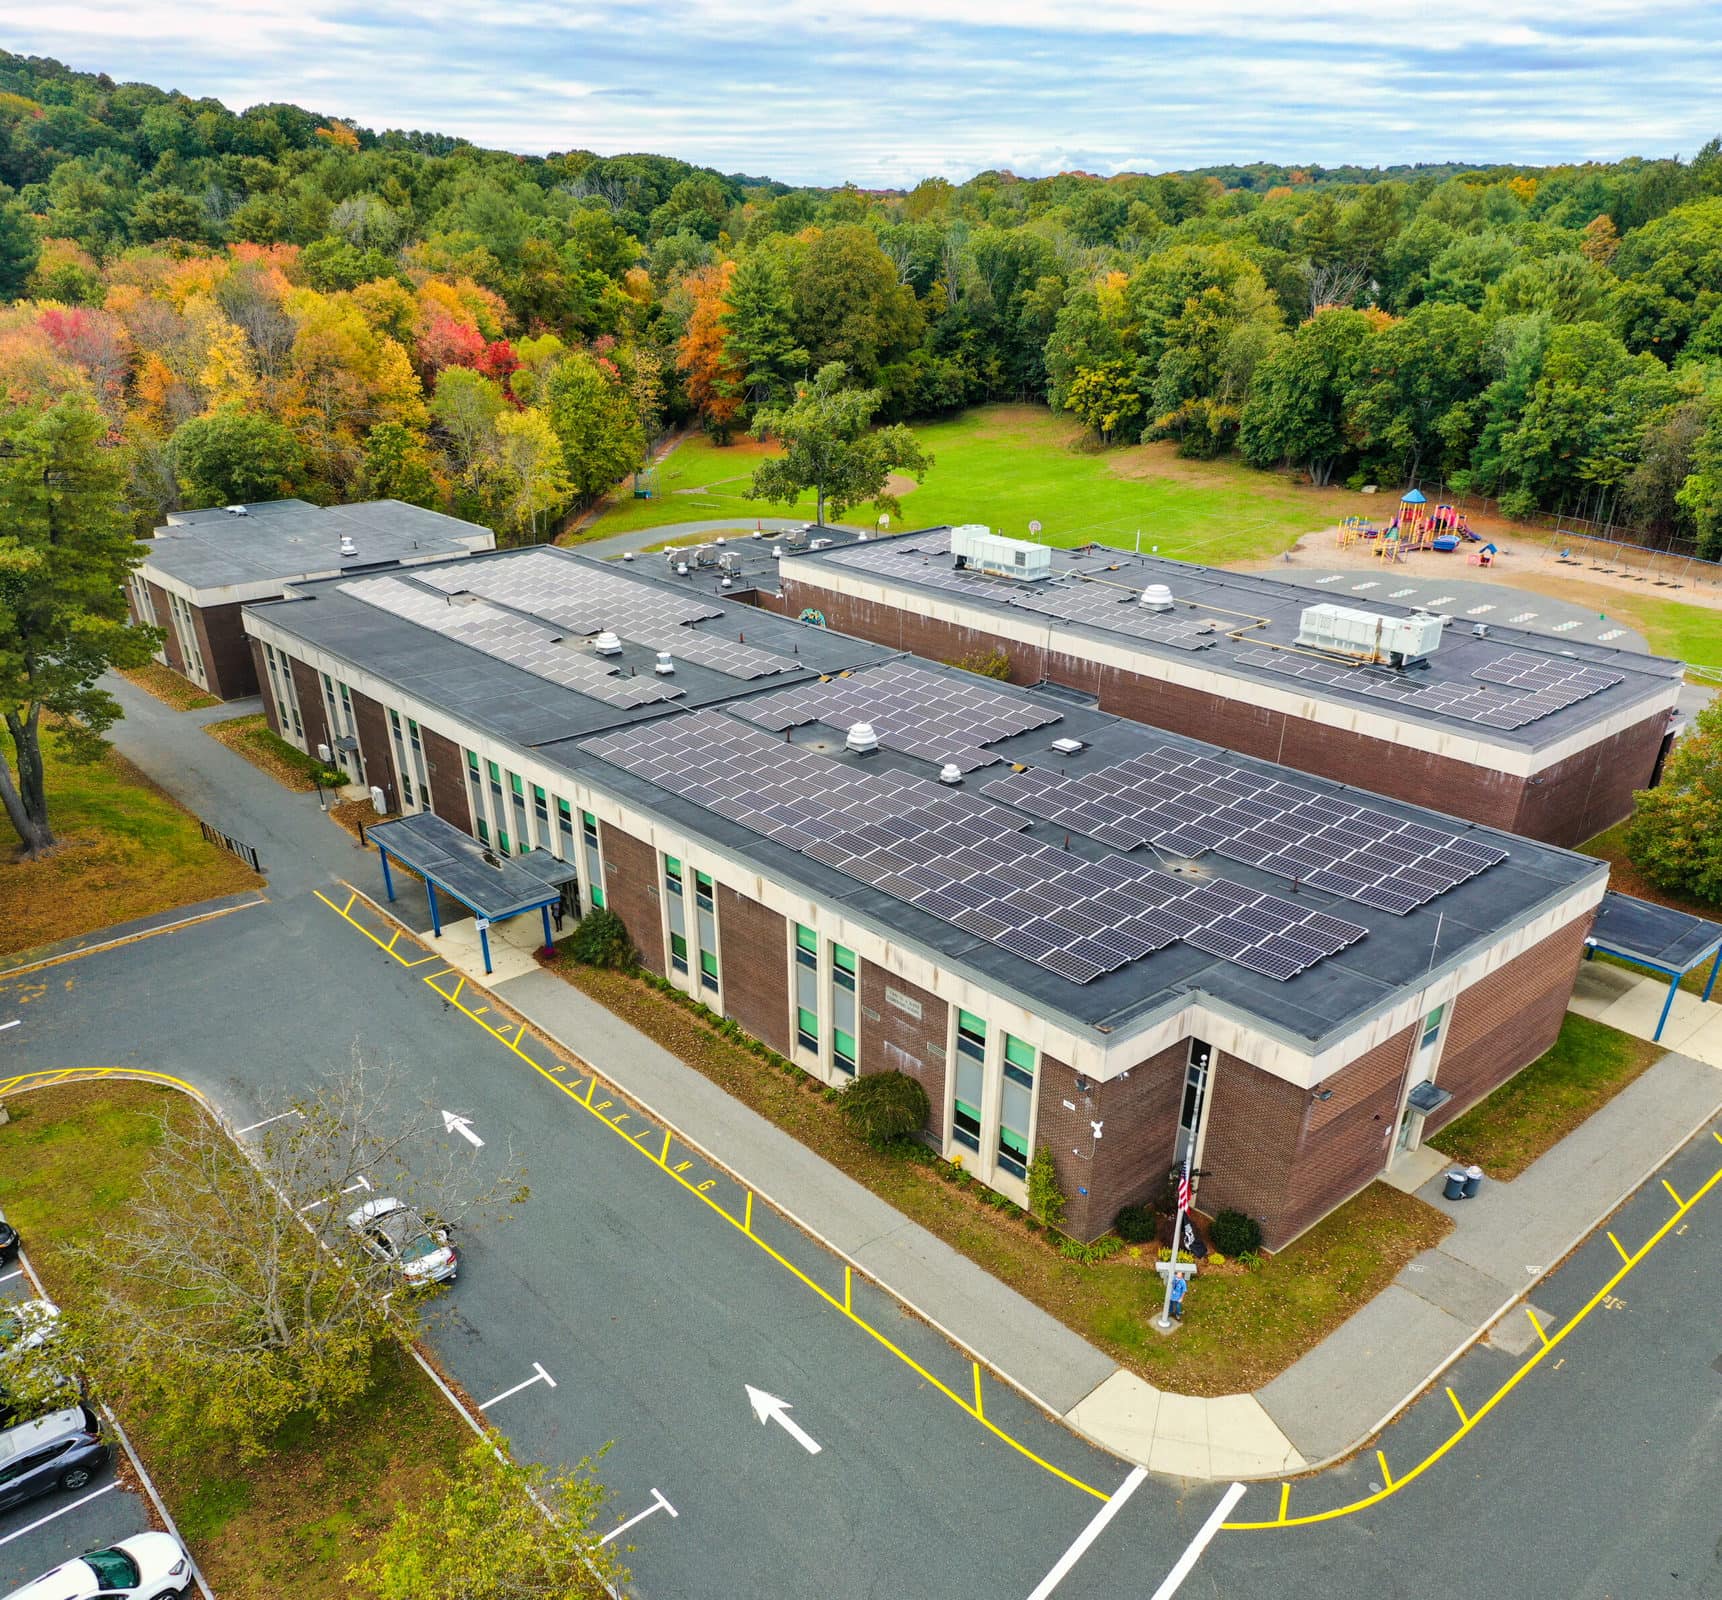 Drone photography shows the new solar panels at Kane Elementary School in Marlborough. The solar panels went live in August.